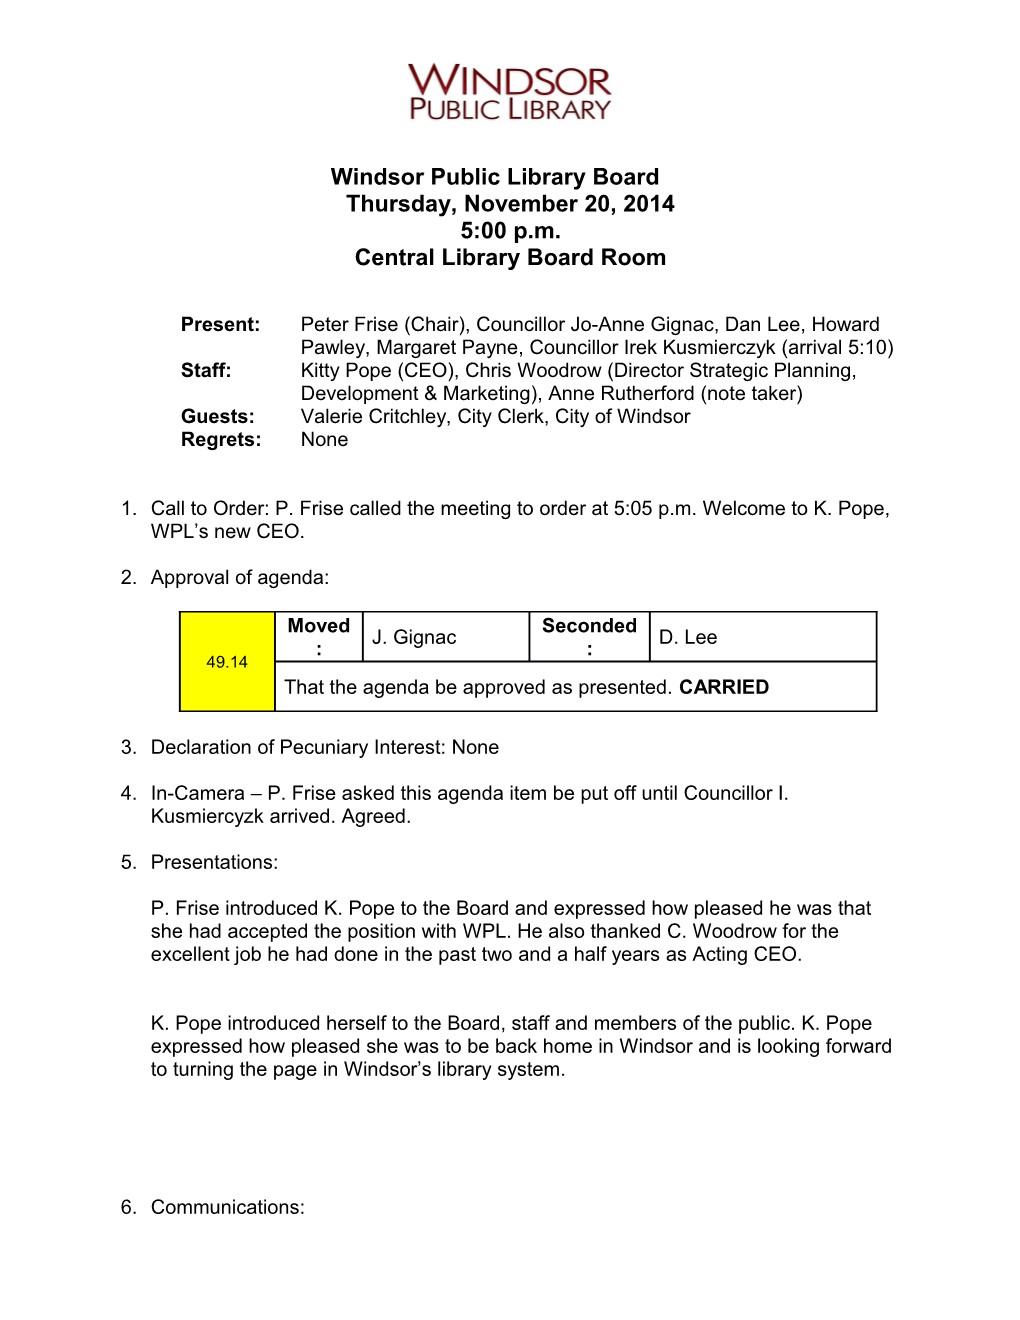 Windsor Public Library Board Meeting Minutes November 20, 2014